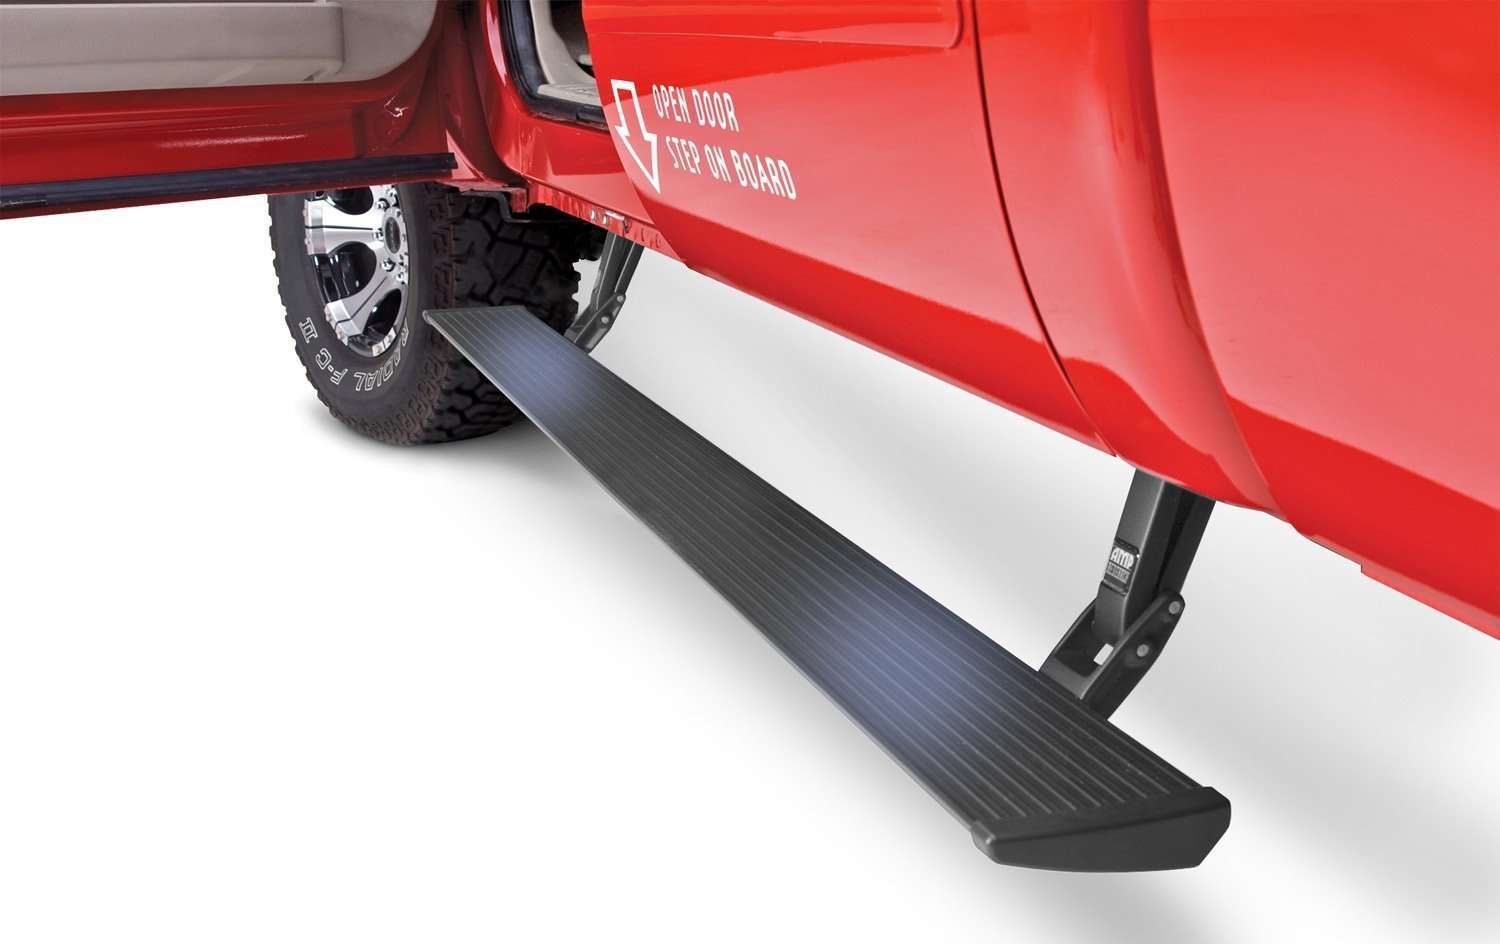 76235-01A PowerStep Automatic Running Boards, Fits 2017-2019 Ford F-250/350/450, All Cabs